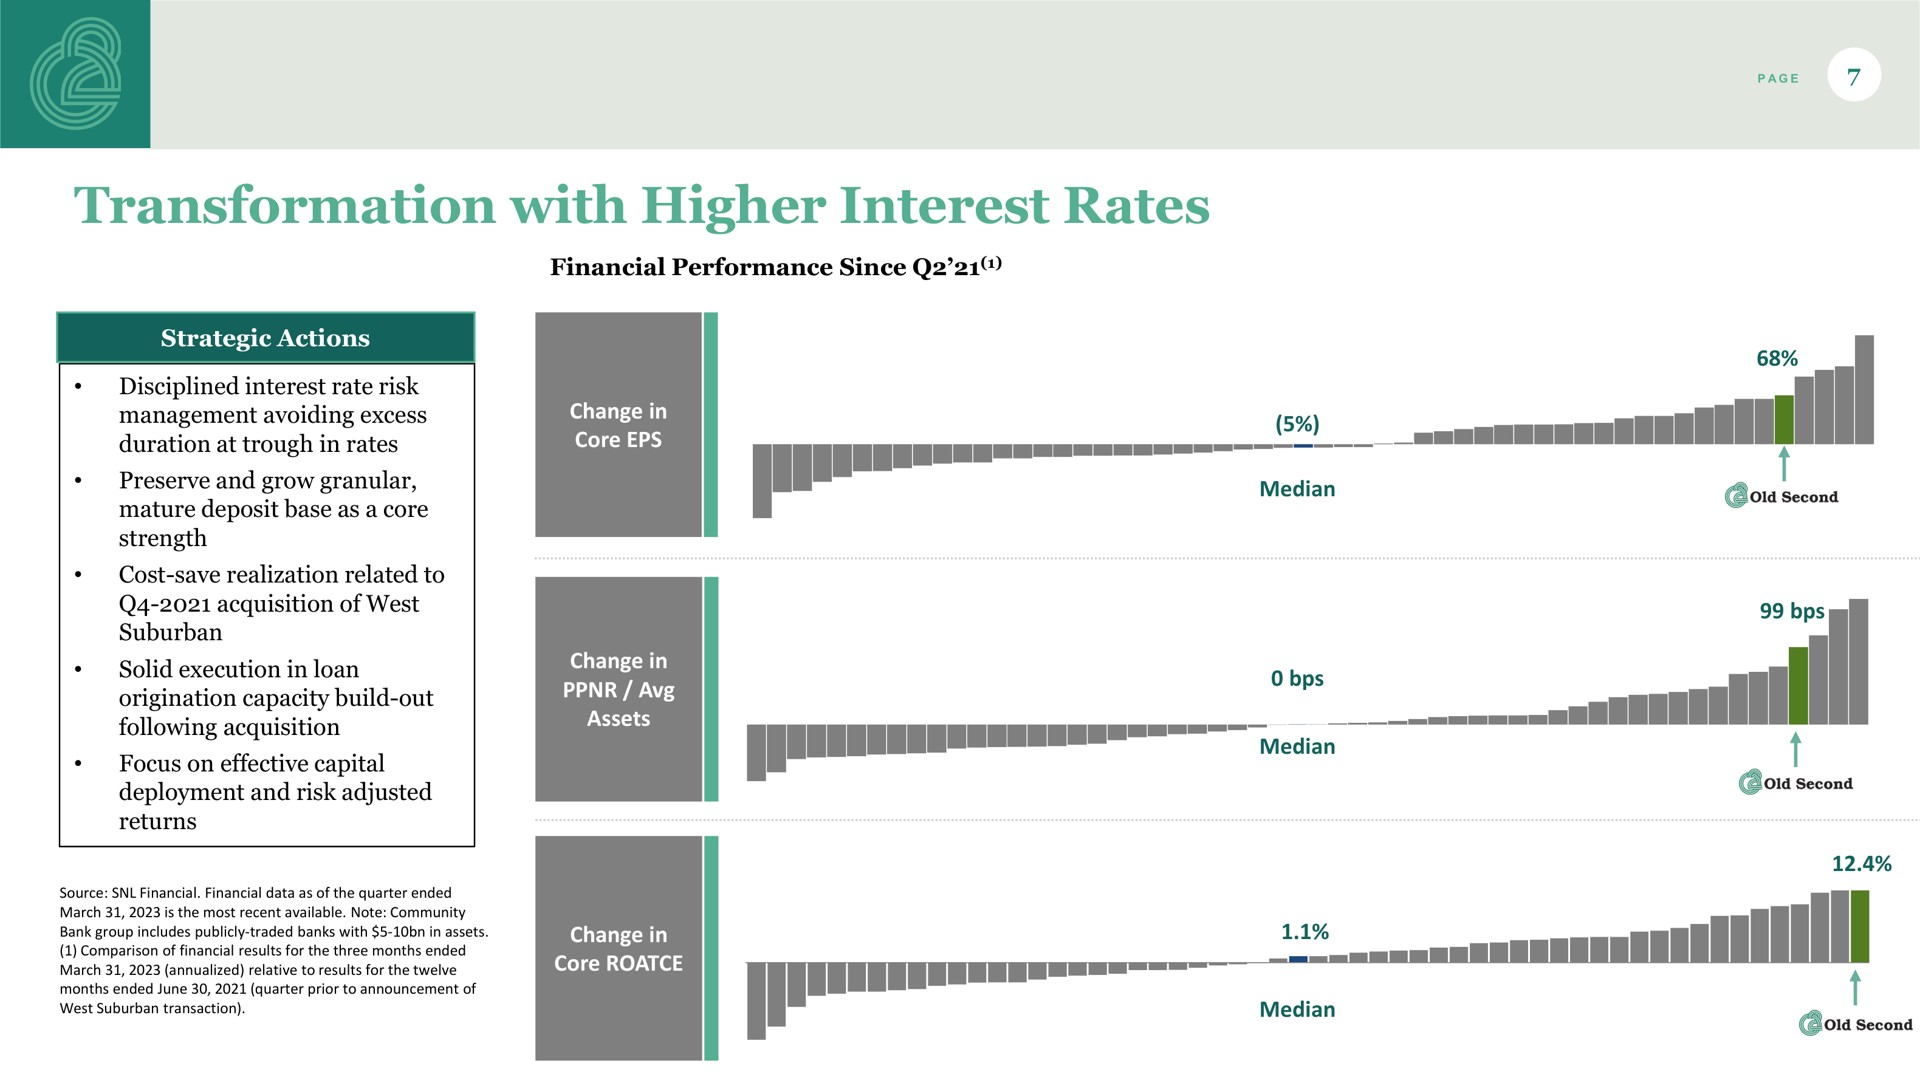 transformation with higher interest rates | Old Second Bancorp